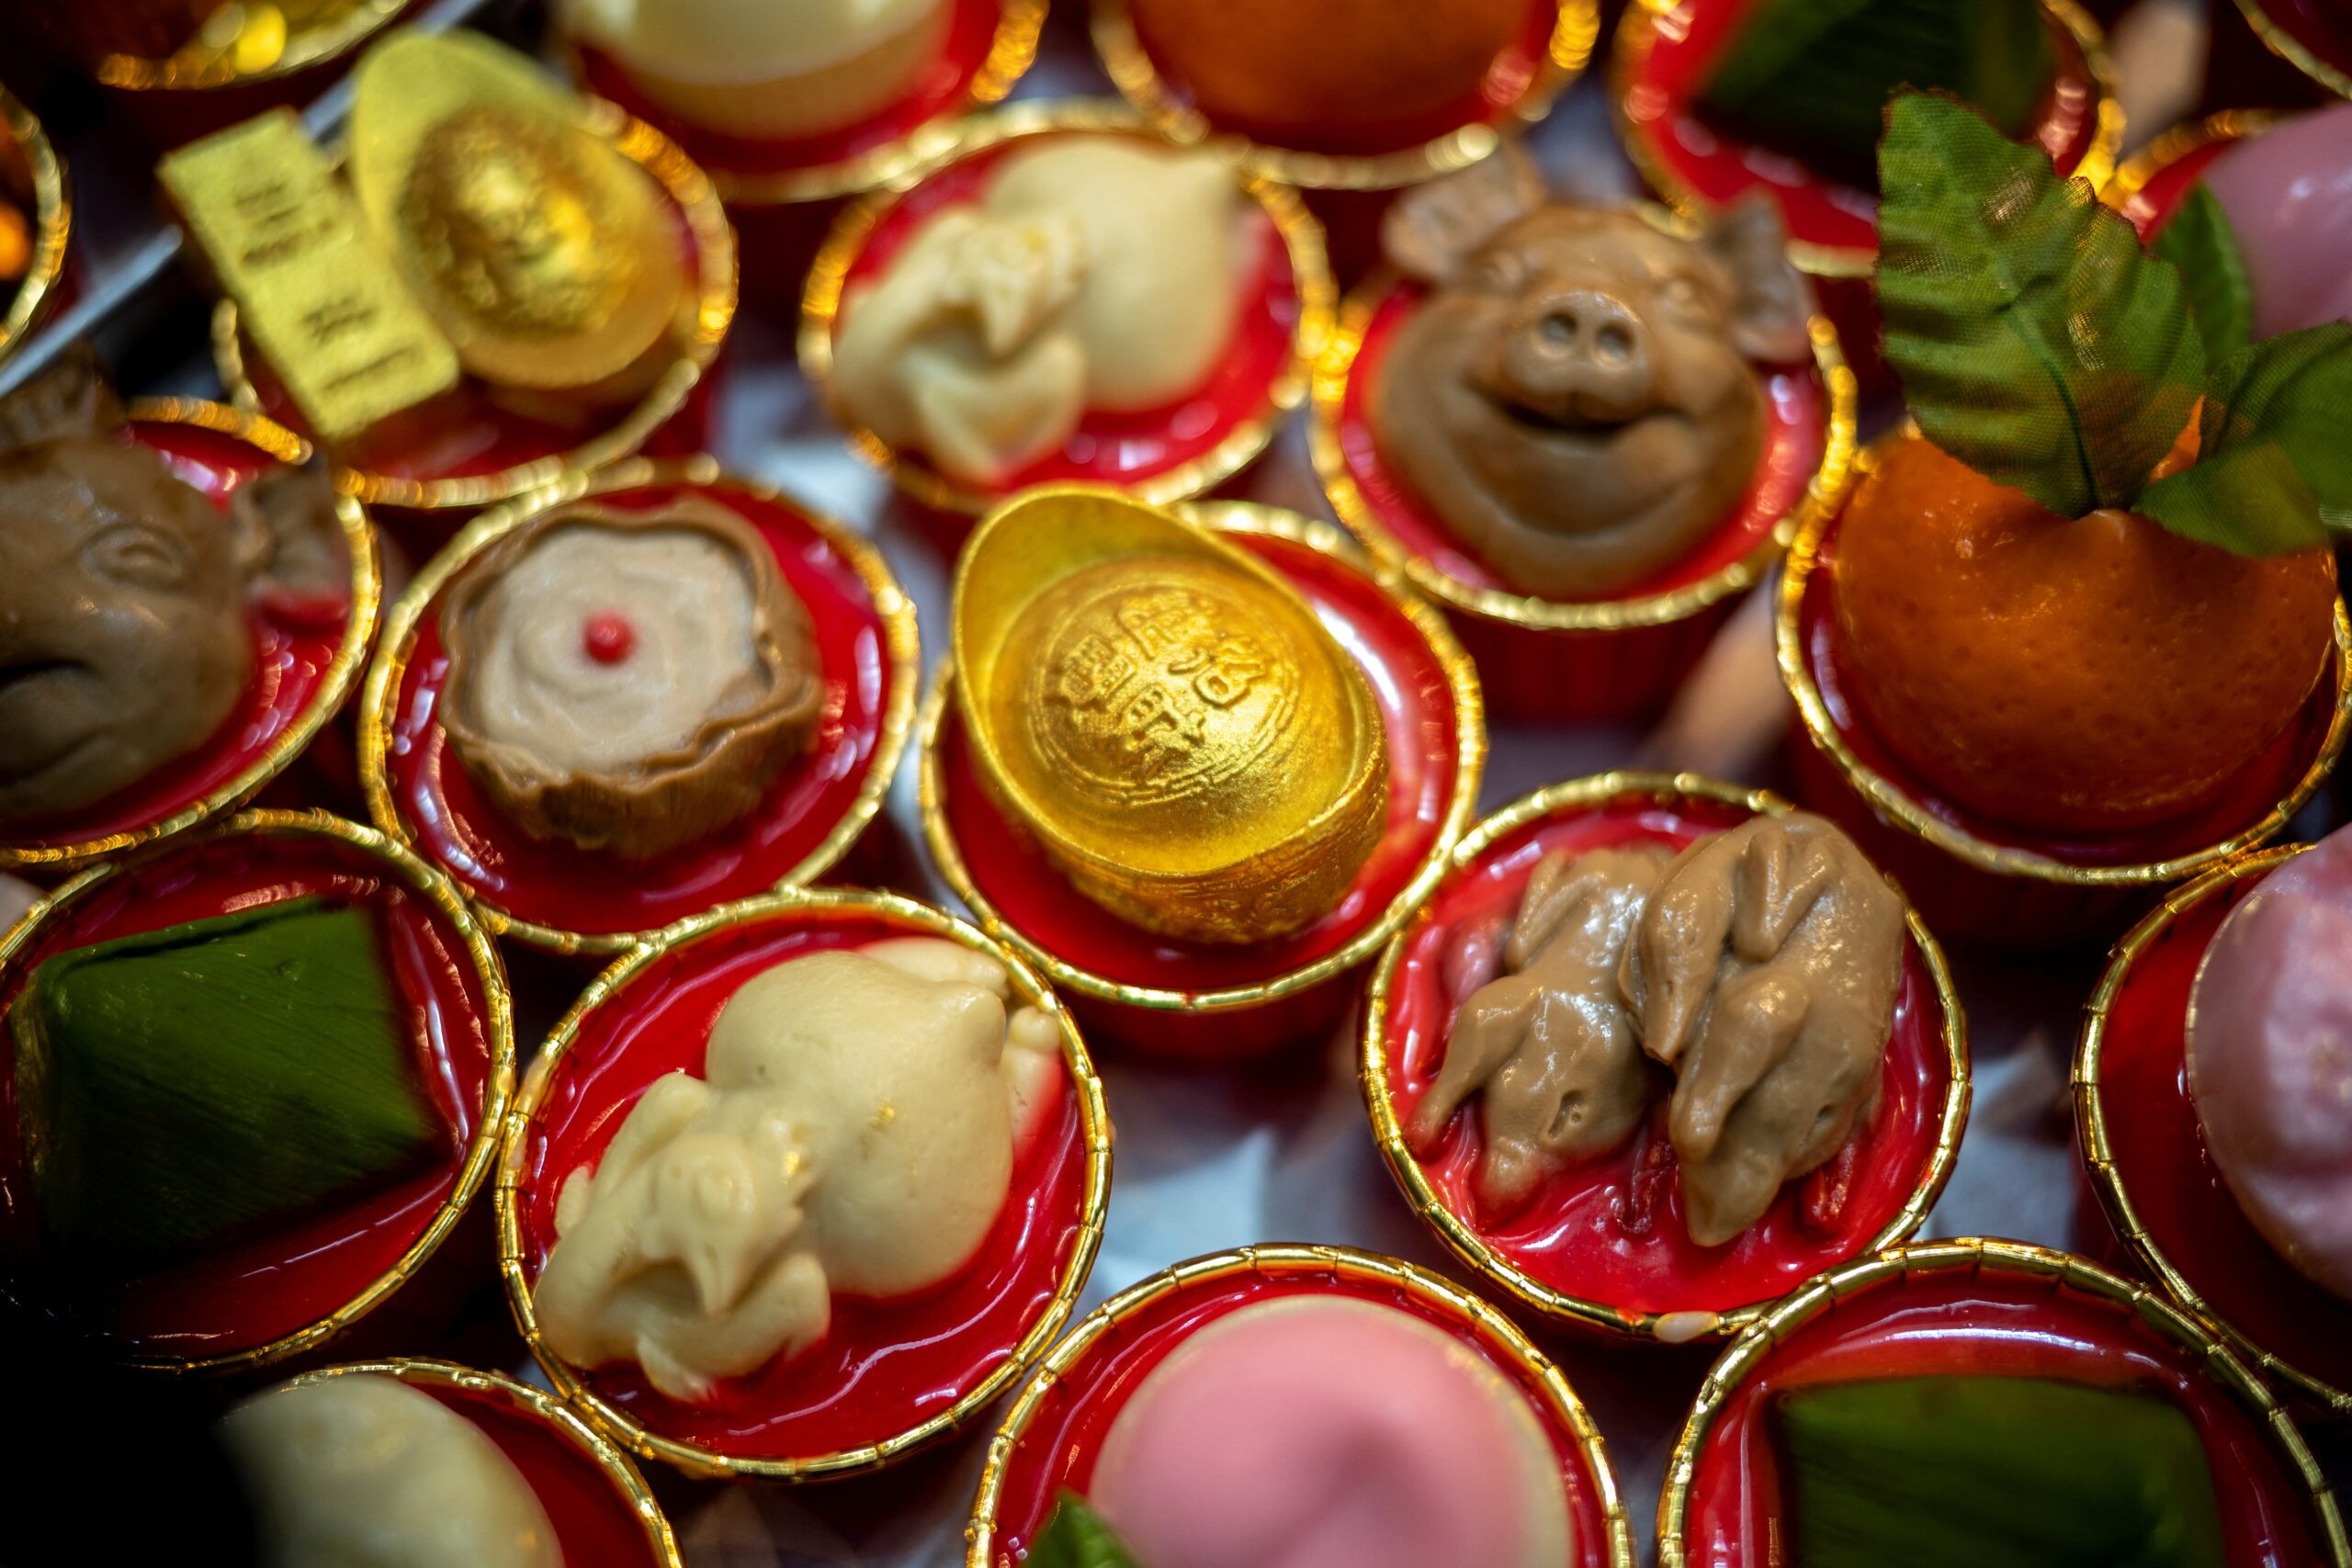 From pigs heads to duck, Thai shop offers Chinese New Year treats in jelly